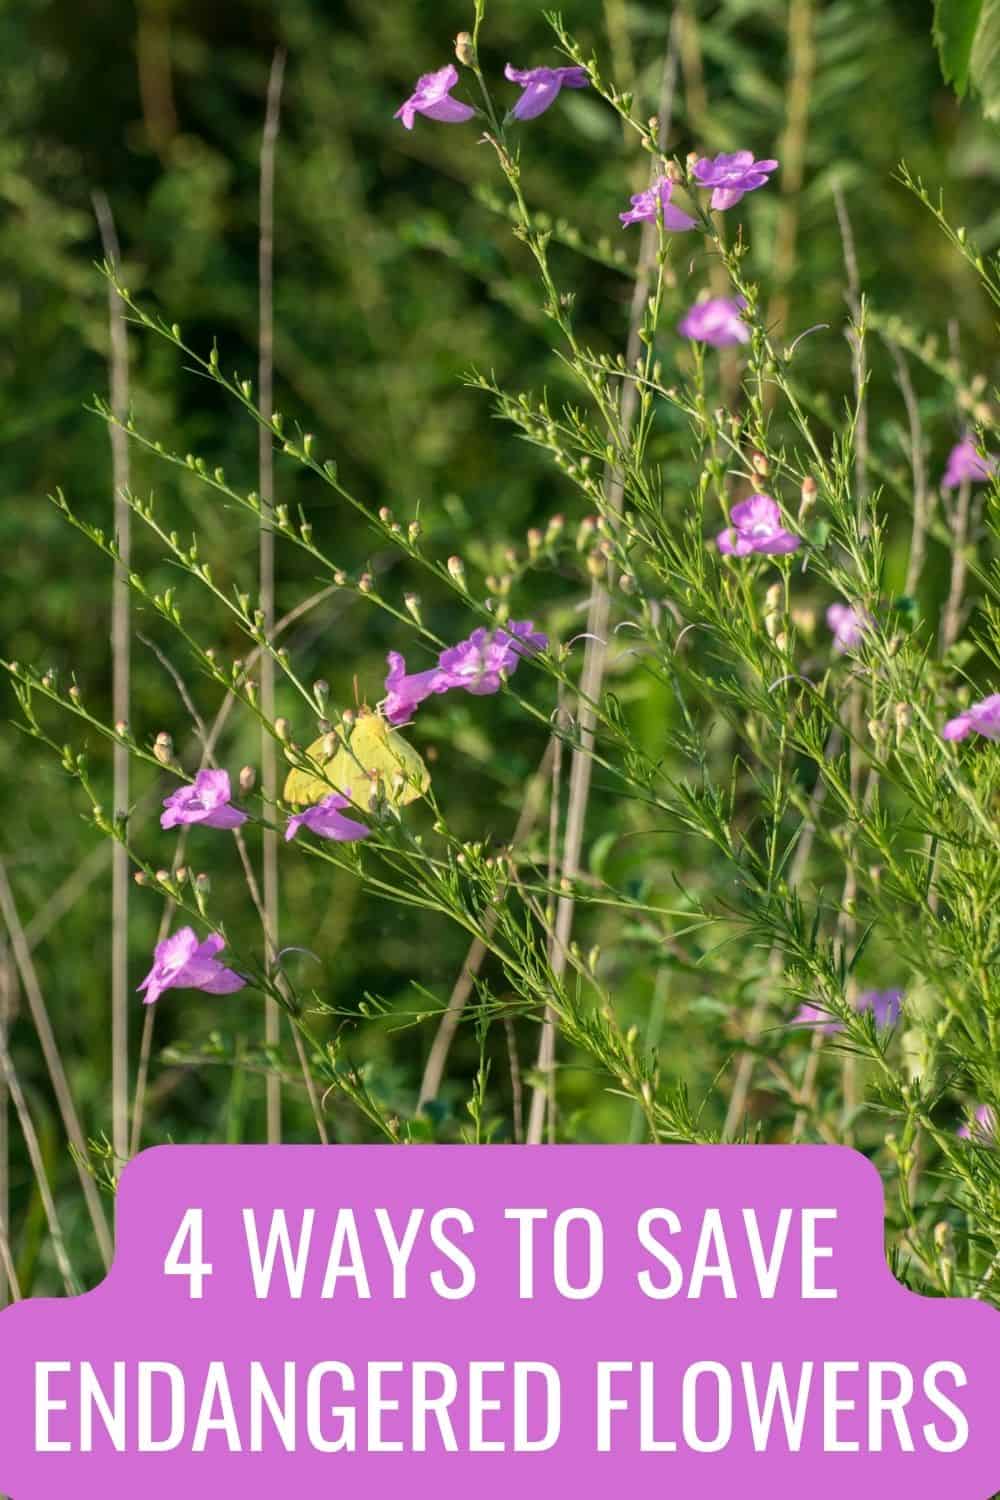 4 ways to save endangered flowers